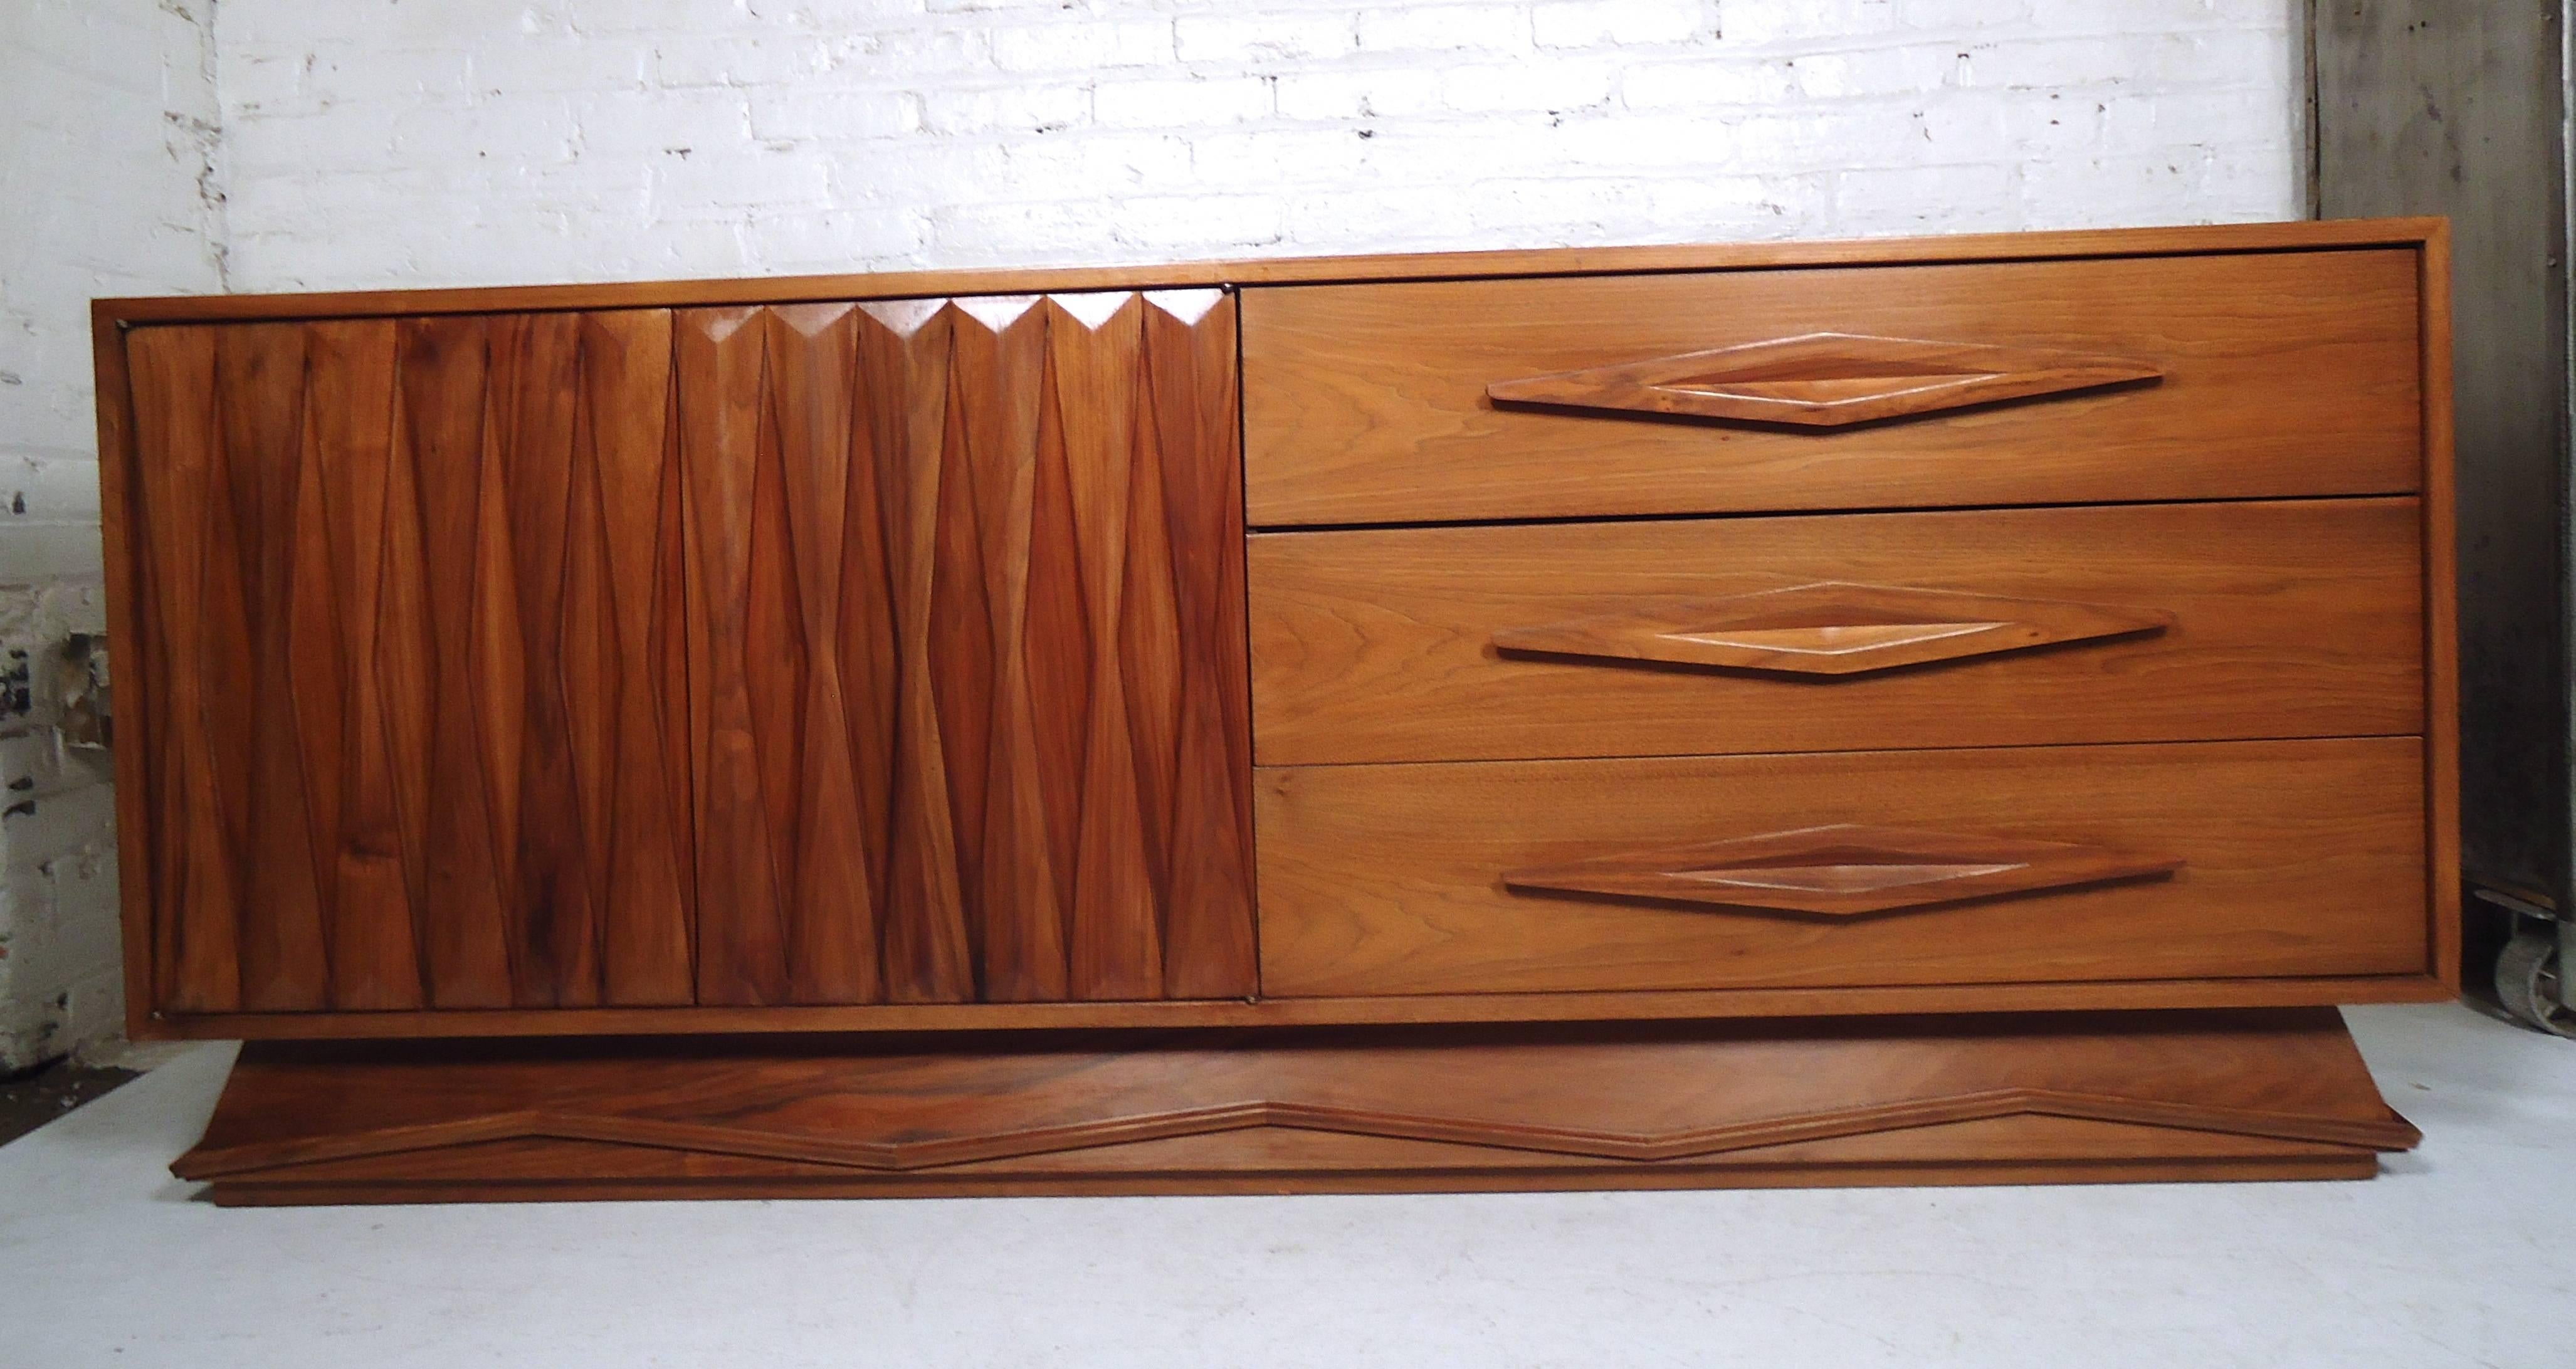 Vintage modern walnut credenza featuring many sculpted wood detail throughout, three drawers and a spacious storage compartment.

(Please confirm item location - NY or NJ - with dealer).